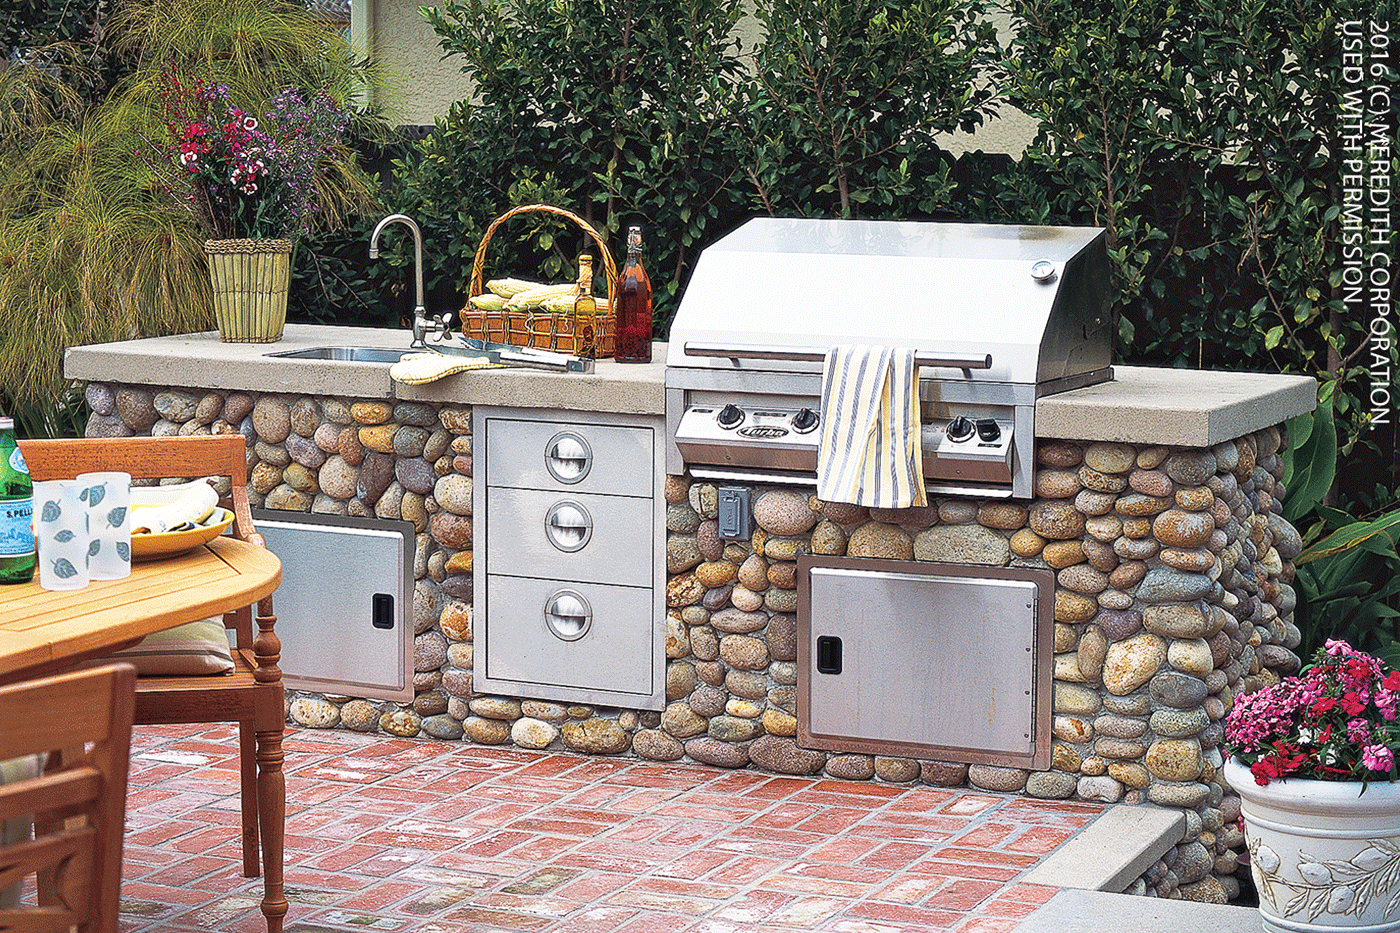 How to Design a Stylish Outdoor Kitchen - bhgrelife.com